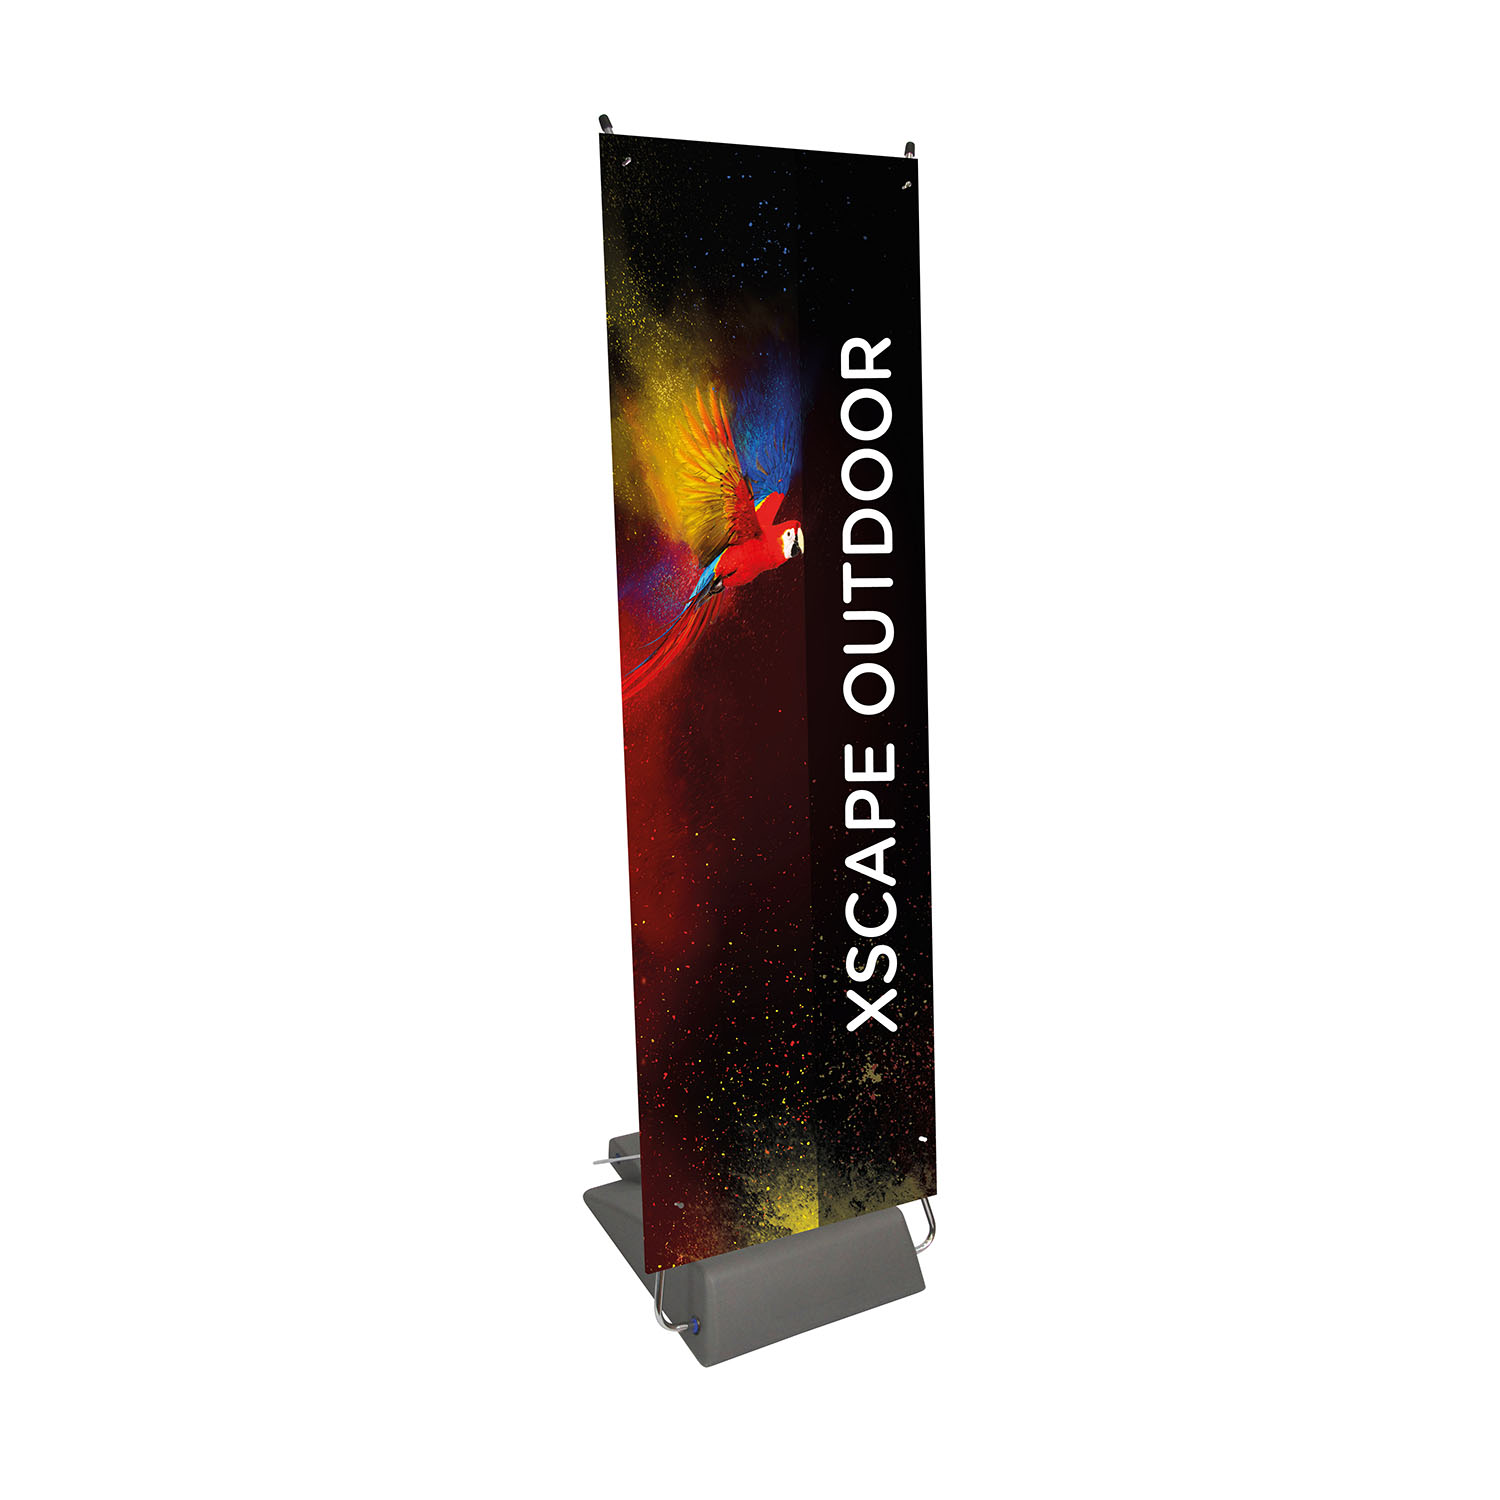 Outdoor X Banner Xscape - The Big Display Company